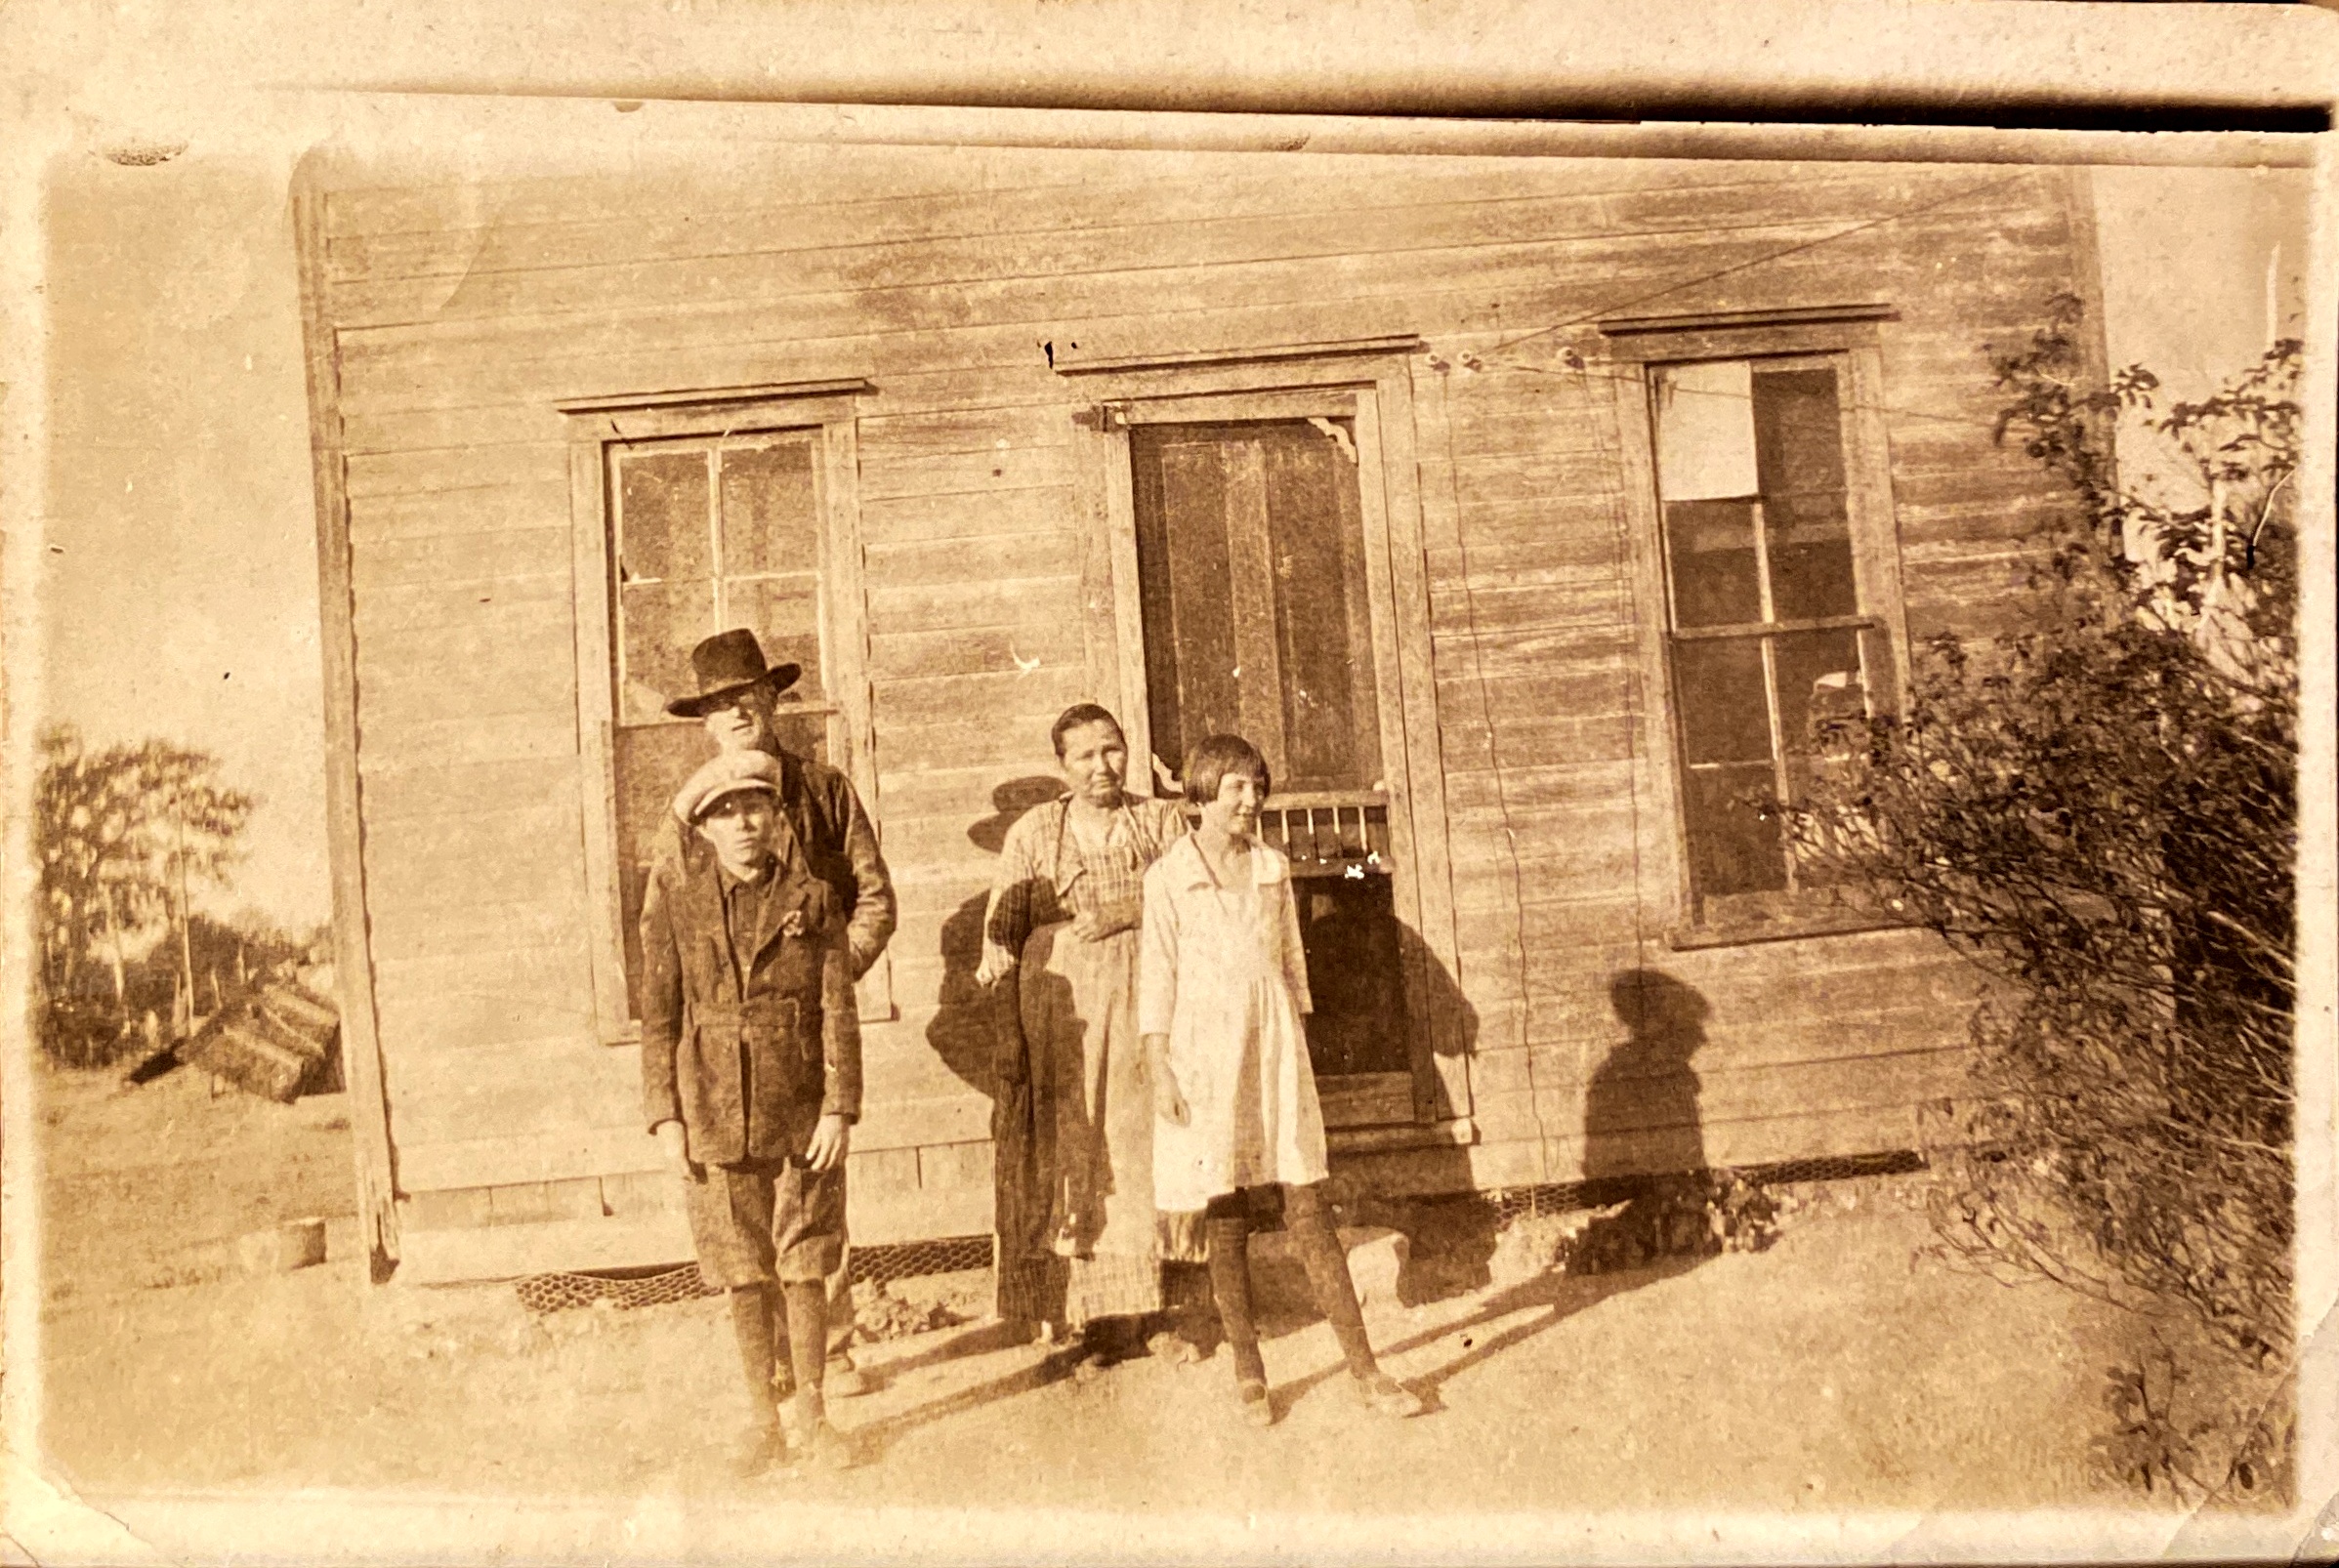 John Crittington Vanbebber and Martha Virginia (Ashton) Vanbebber with two youngest Clarence Vanbebber & Alma Vanbebber at the original homestead in Bowie, Montague County, Texas about 1915 (K)